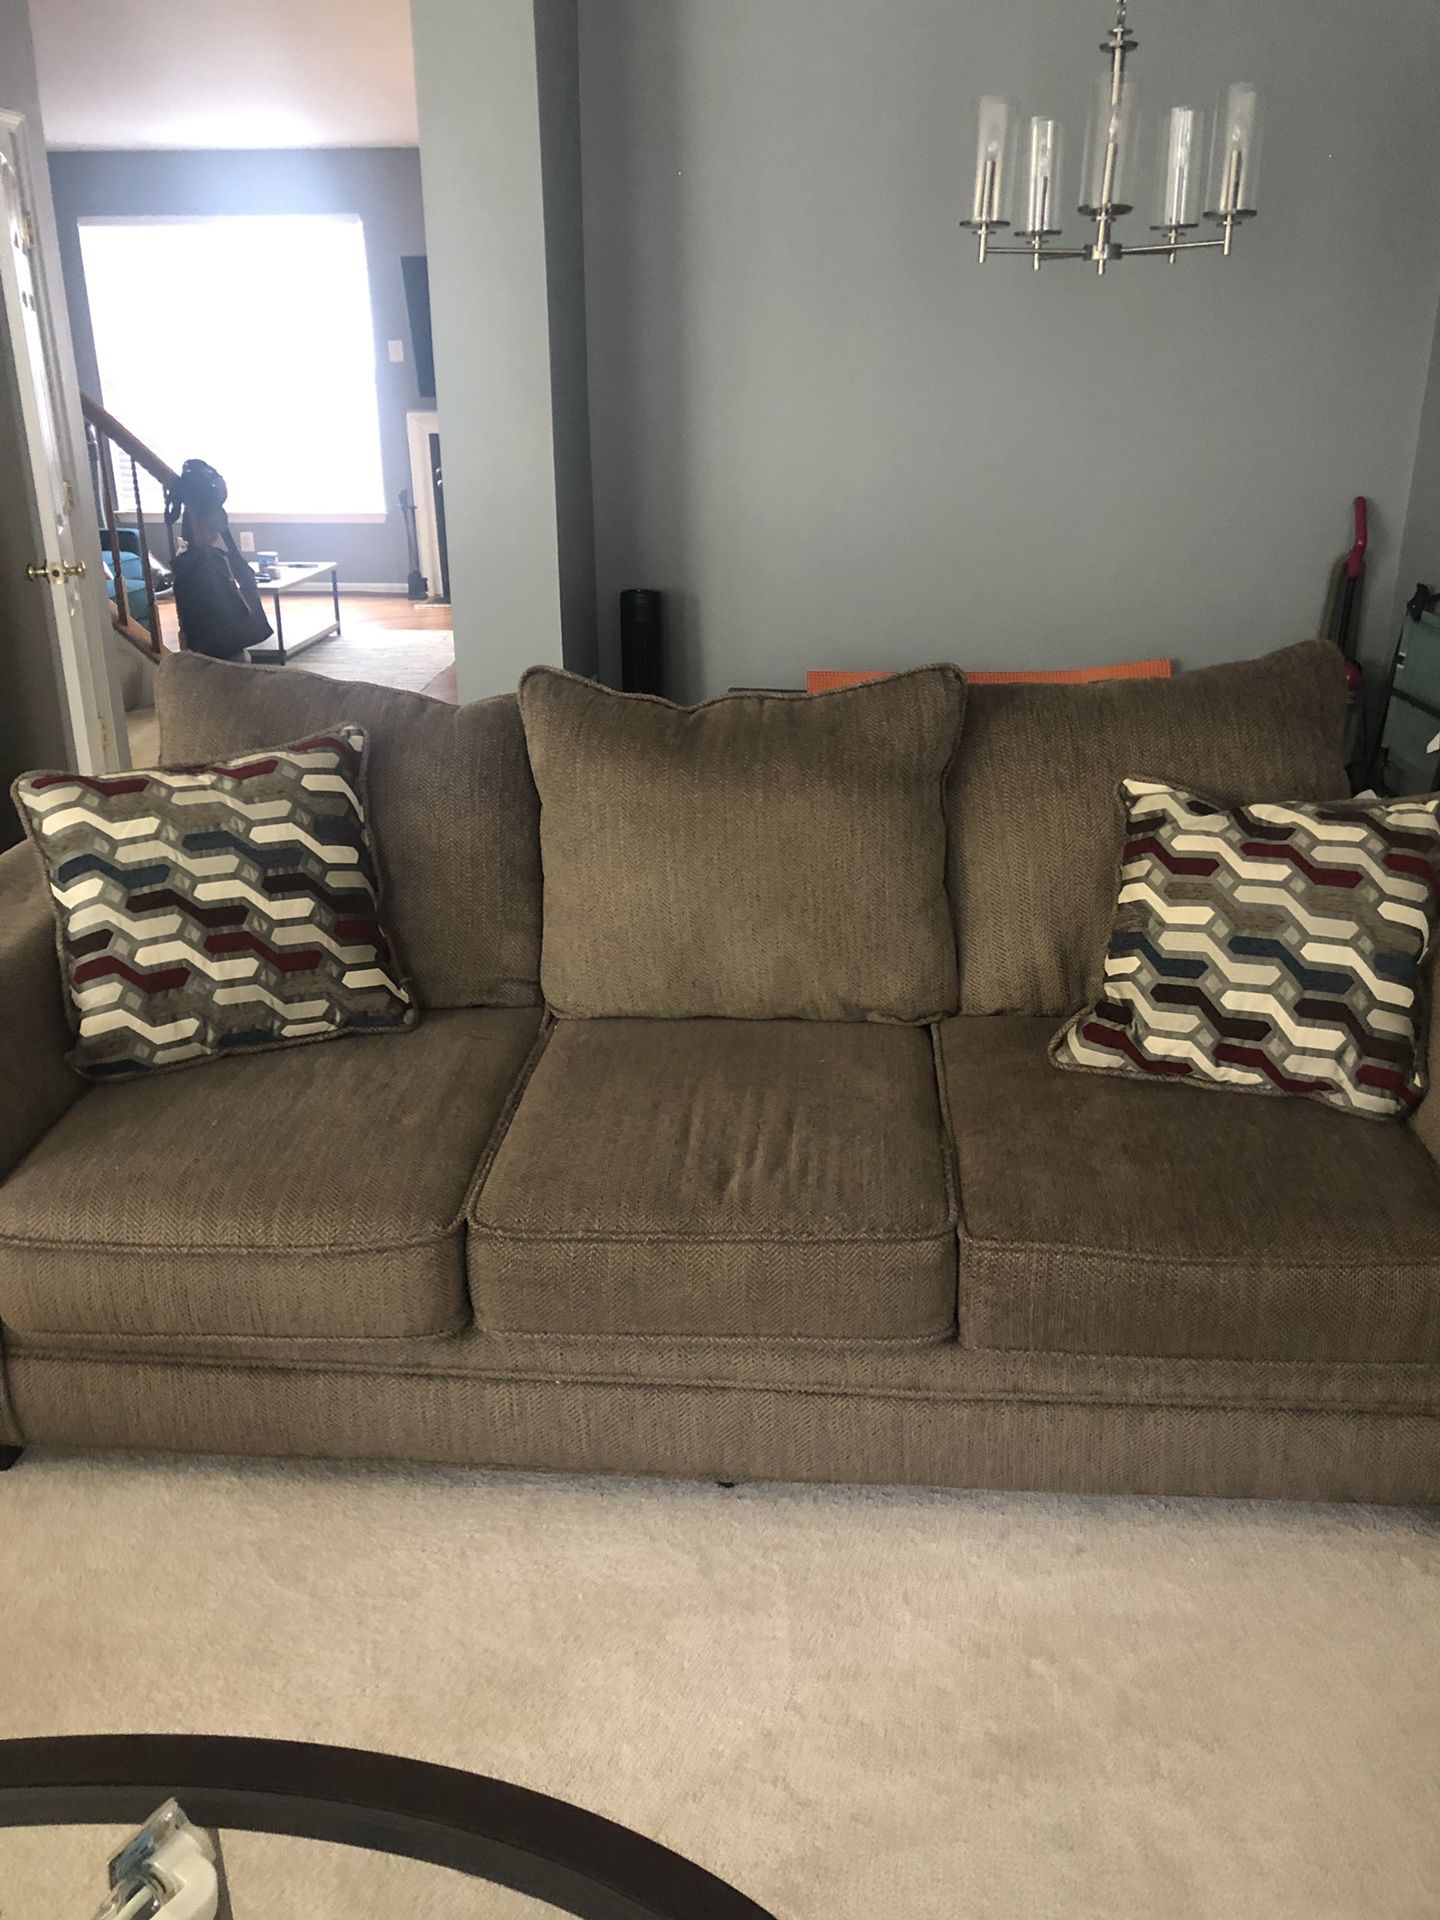 3 Piece Sofa Set - Couch, Love seat, & Chair